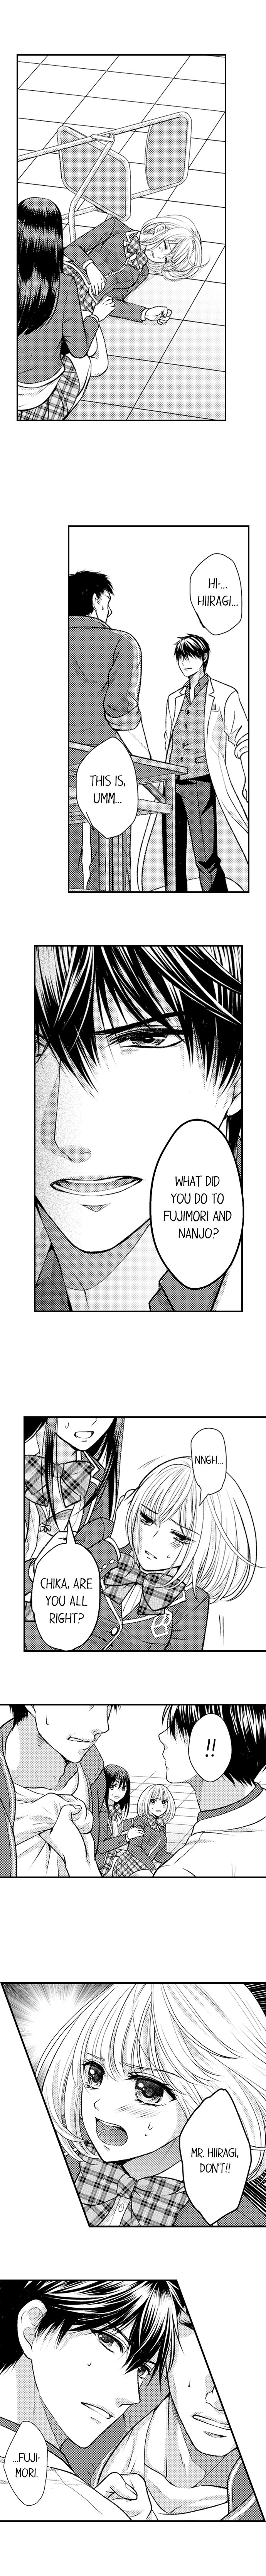 He Took My Adult Toy - "I'll Teach You How to Use It" Ch.20